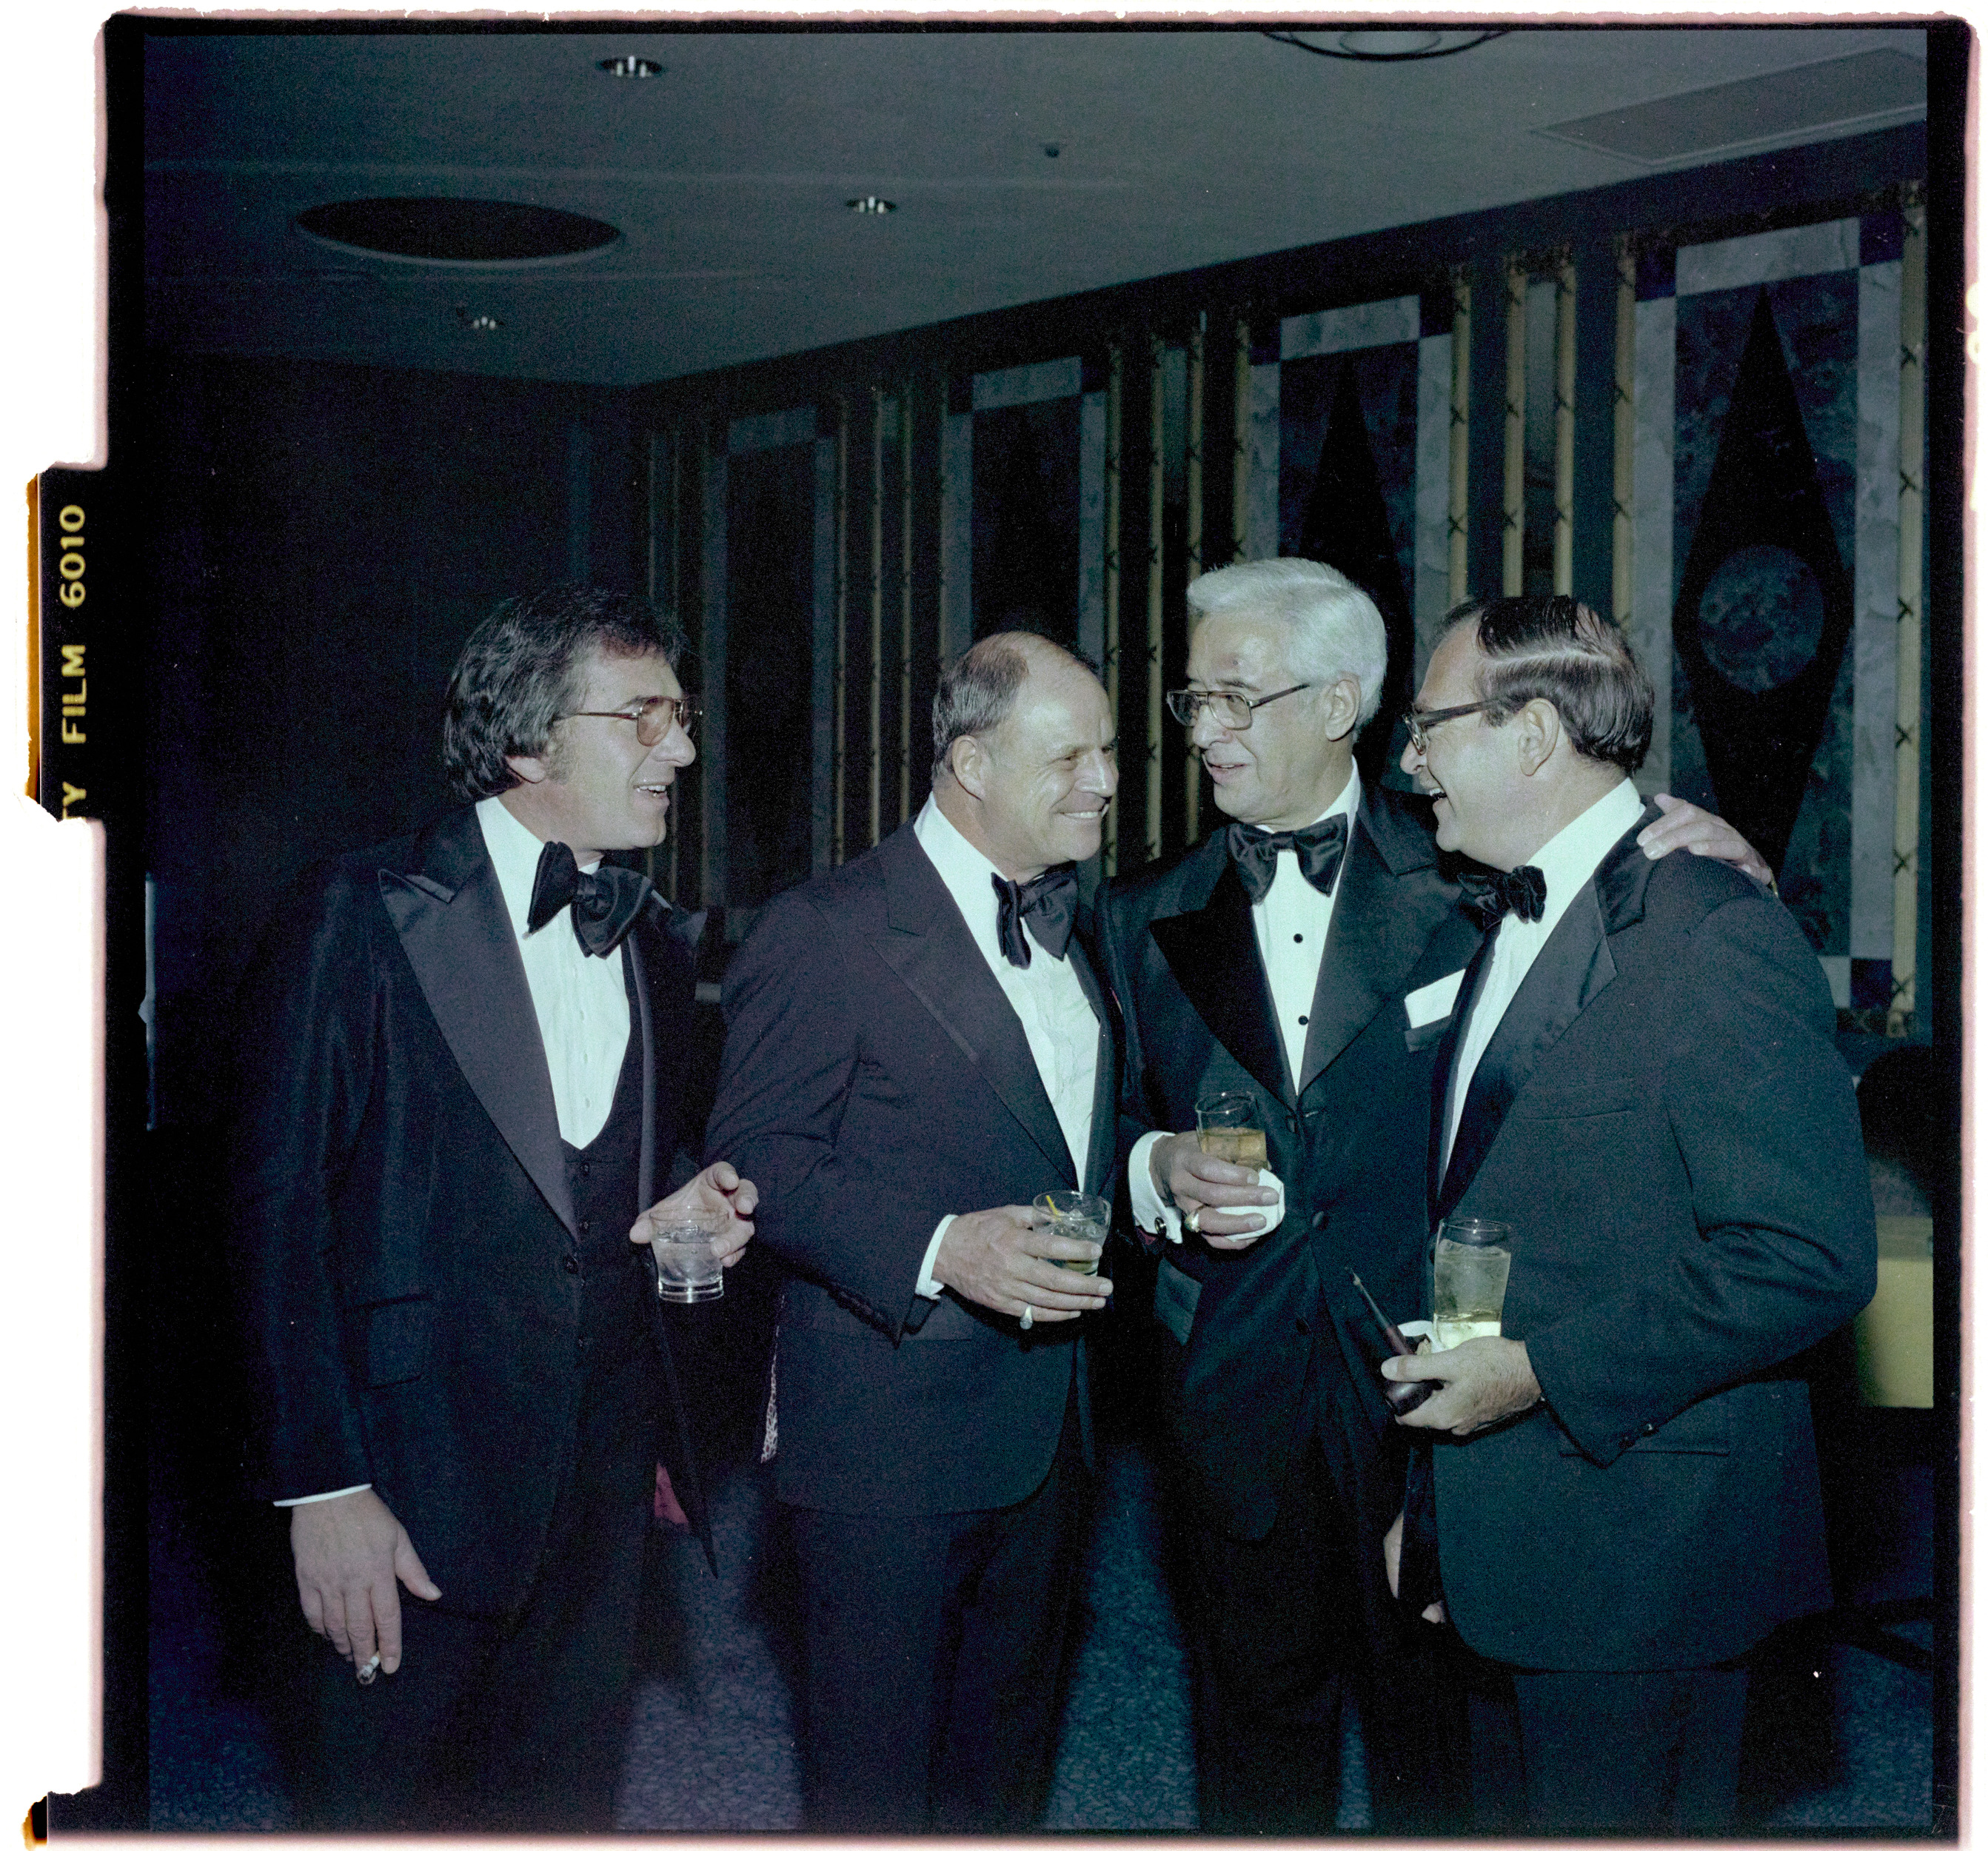 Photographs of Combined Jewish Appeal (Israel Bonds Dinner), image 08